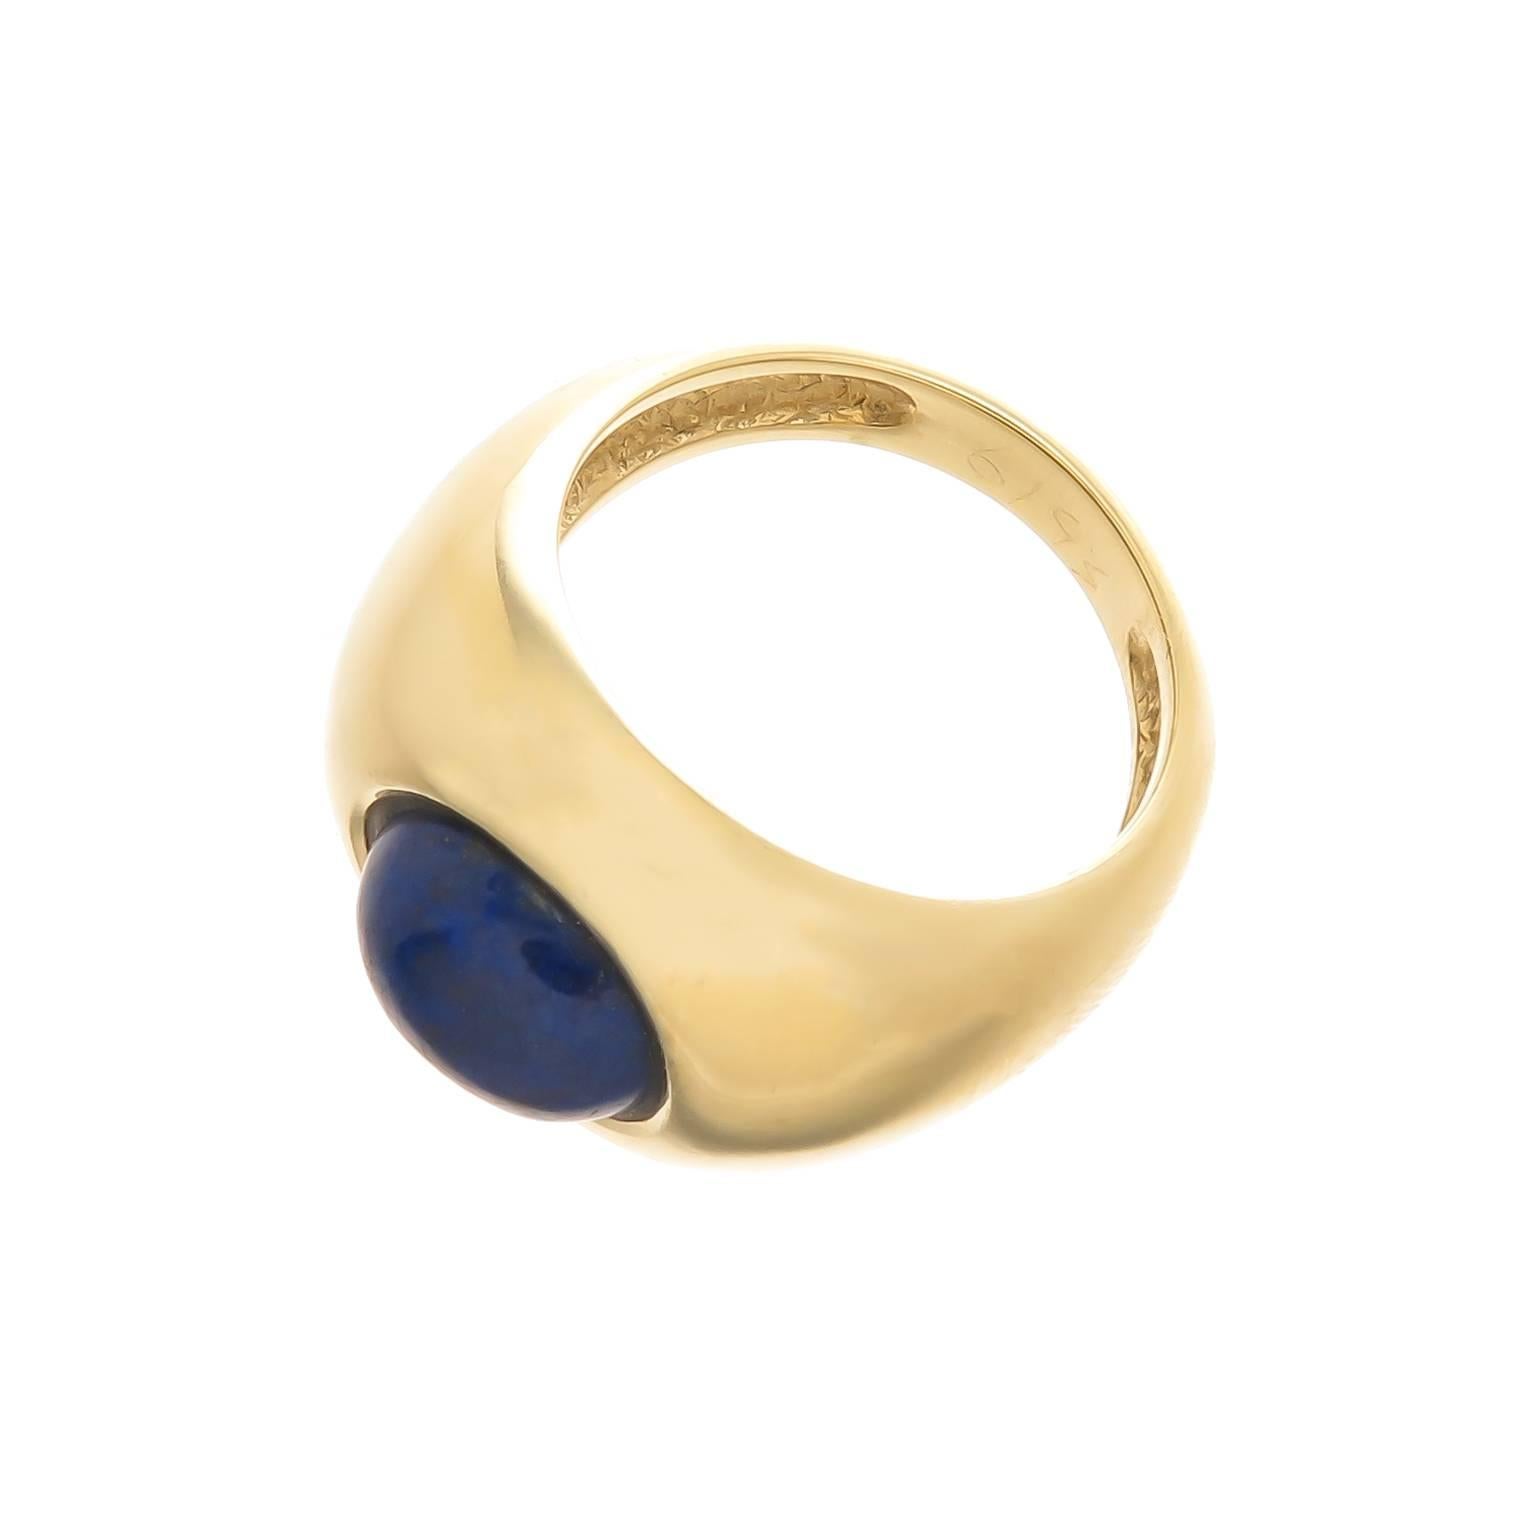 Circa 1980s simple and elegant Tiffany & Co. 18K yellow Gold and Lapis Lazuli Ring, measuring 3/4 inch across the top and set with a fine color Lapis measuring 10 X 8 MM. Finger size = 6 1/2